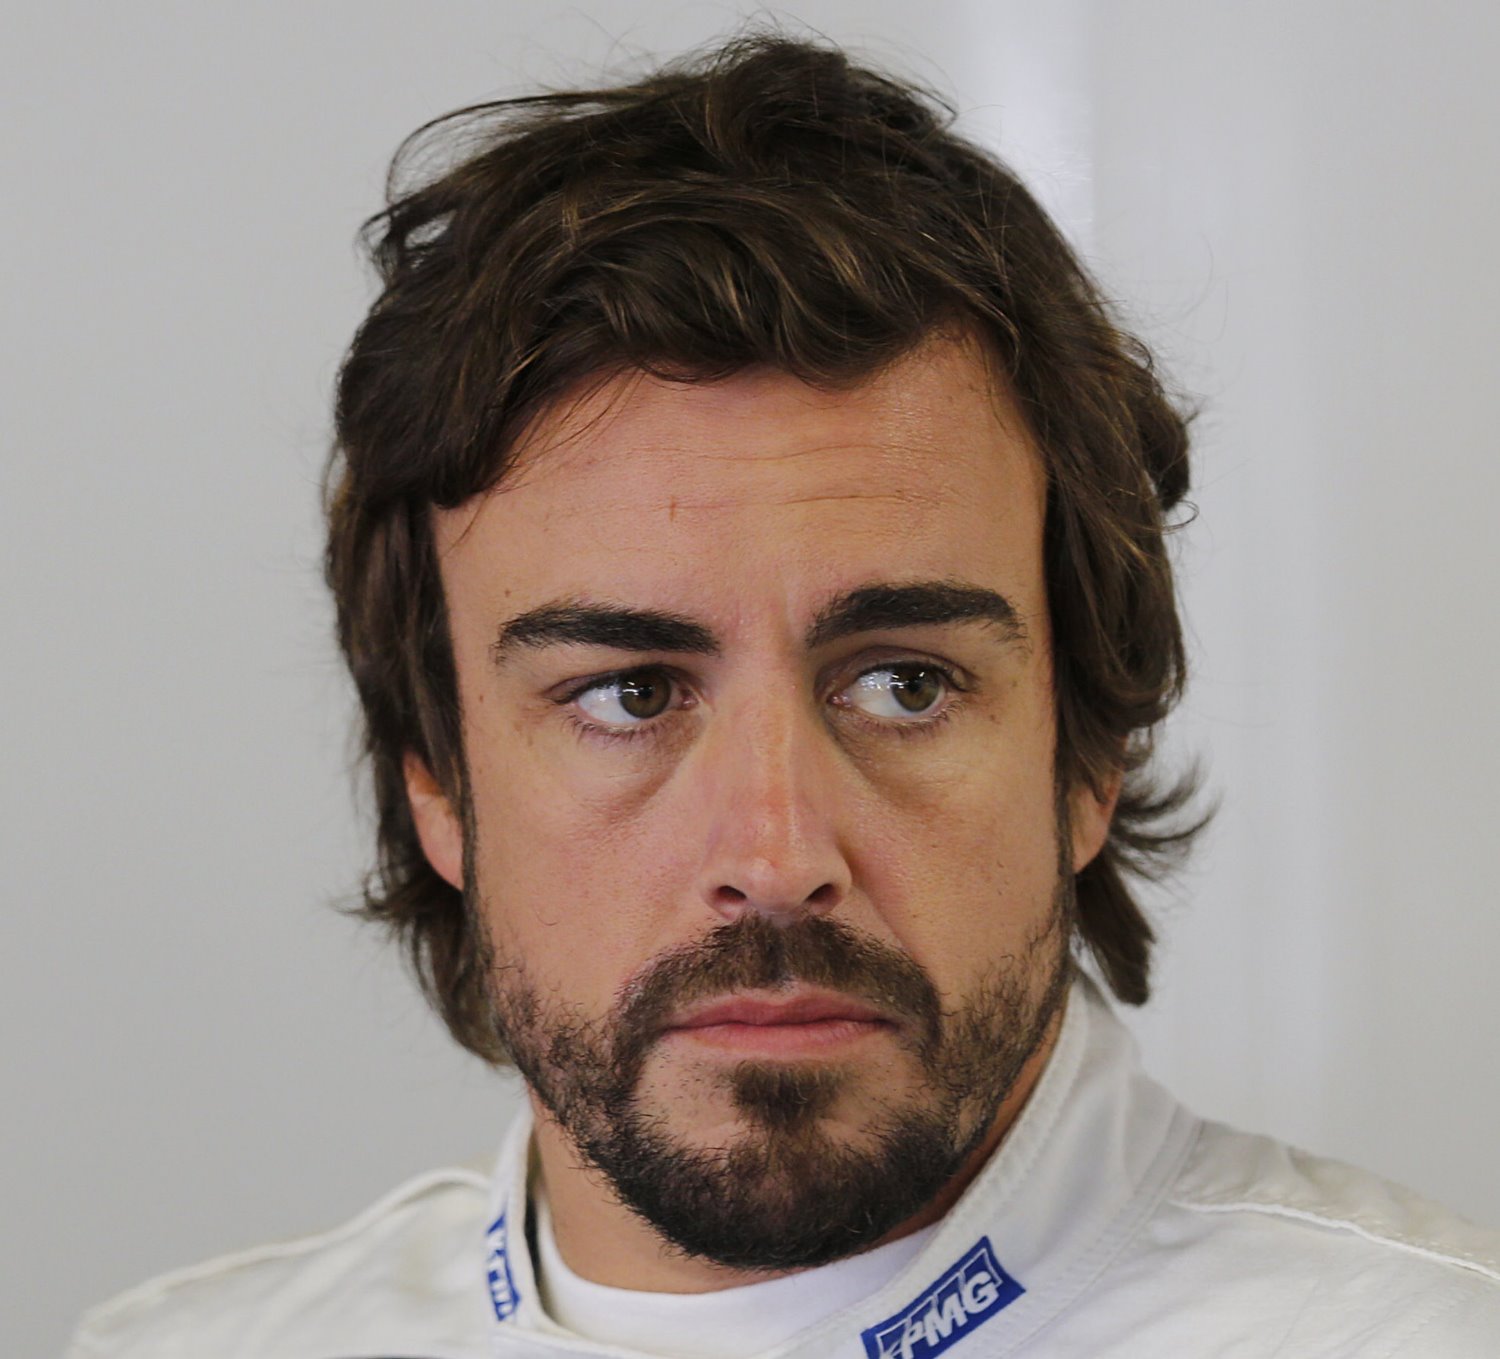 Alonso looks in the mirror everyday knowing he has zero chance to win